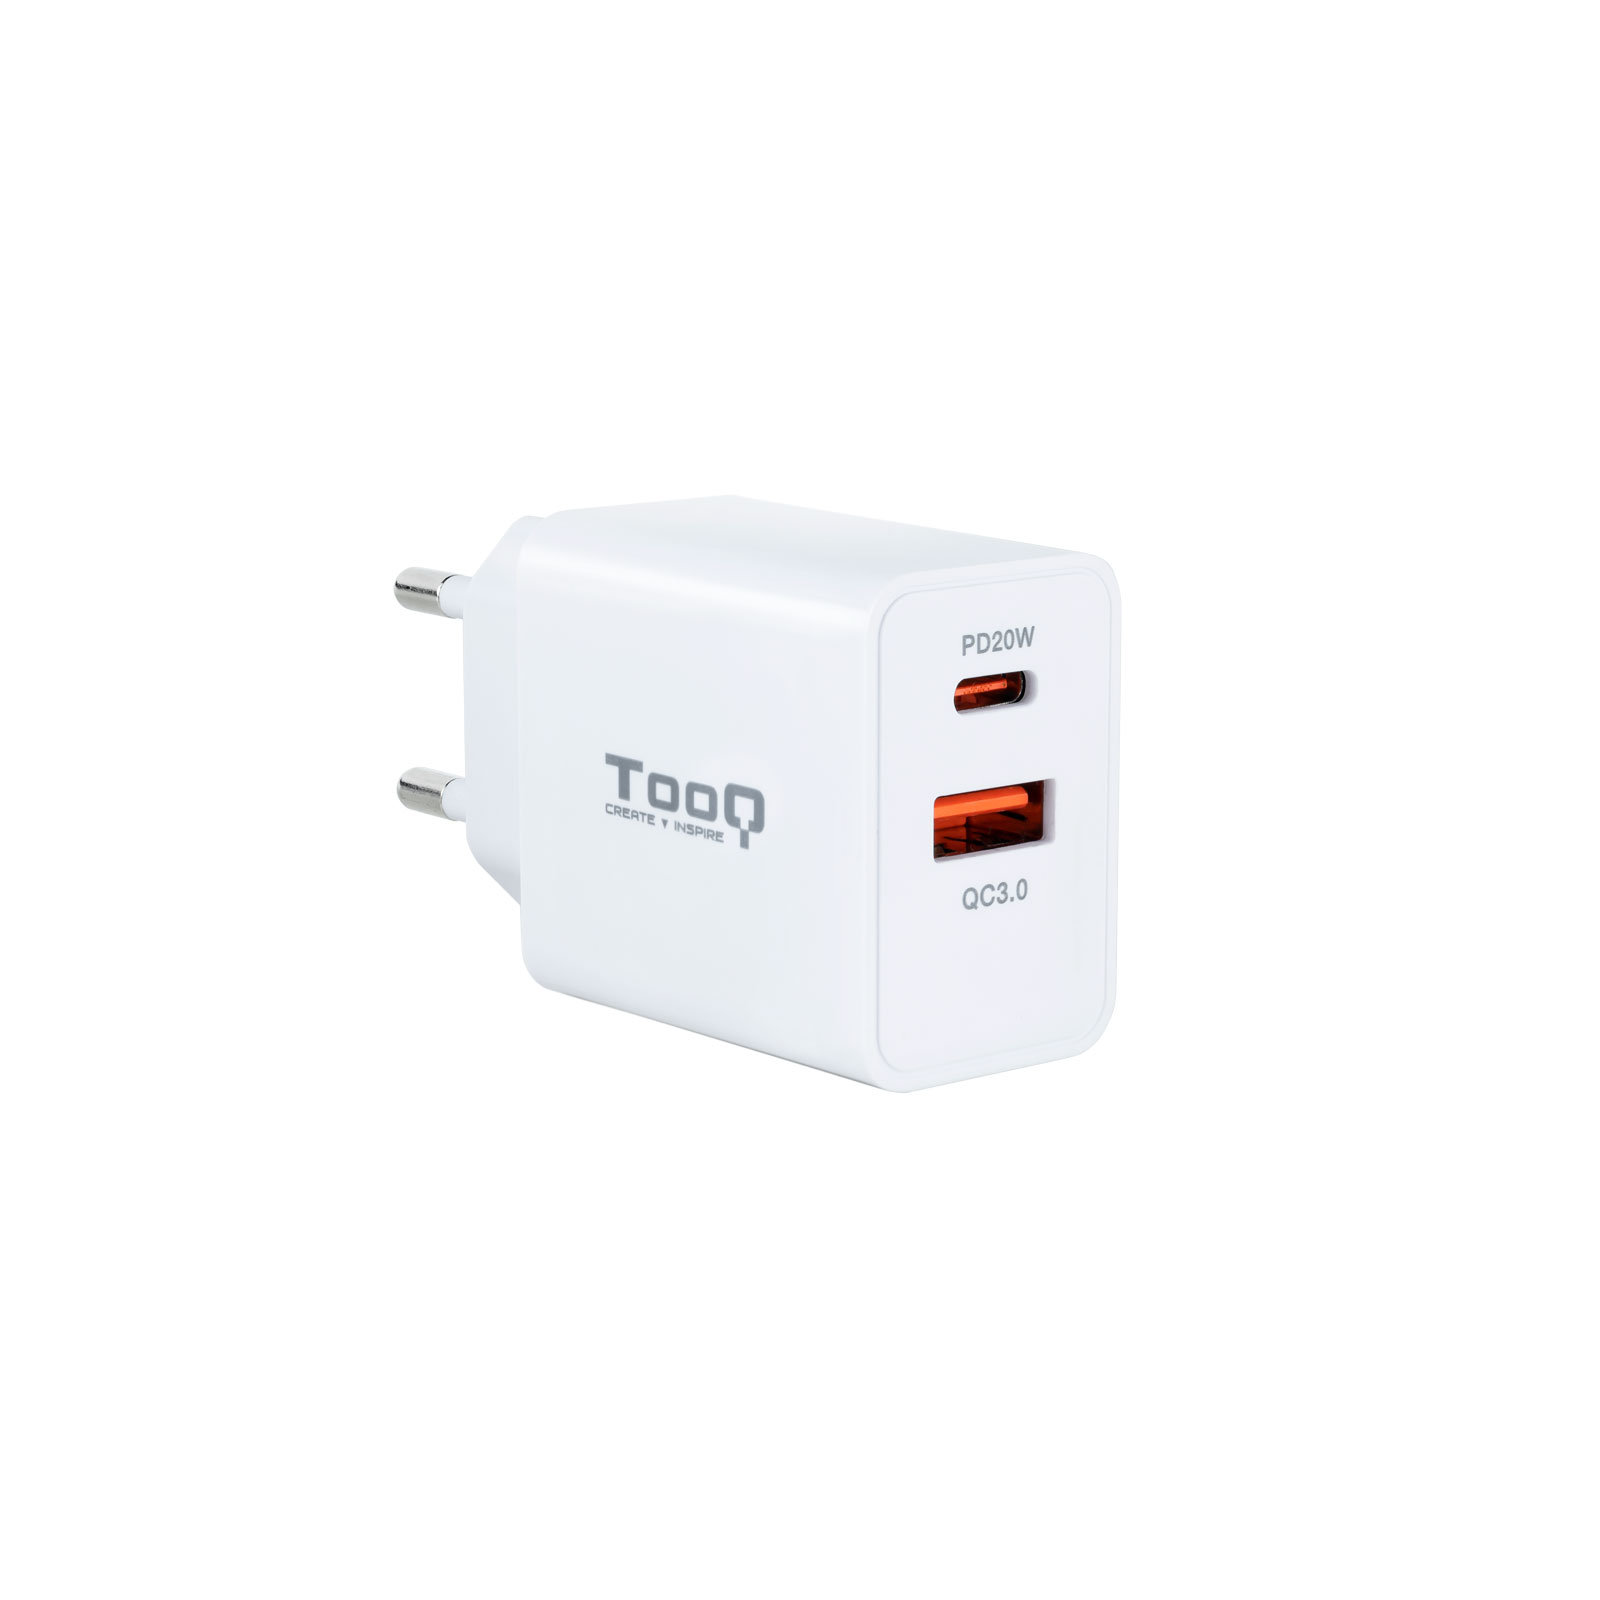 Tooq Chargeur Mural USB 3.0 18W, USB-C 20W - Charge Rapide - Couleur Blanche